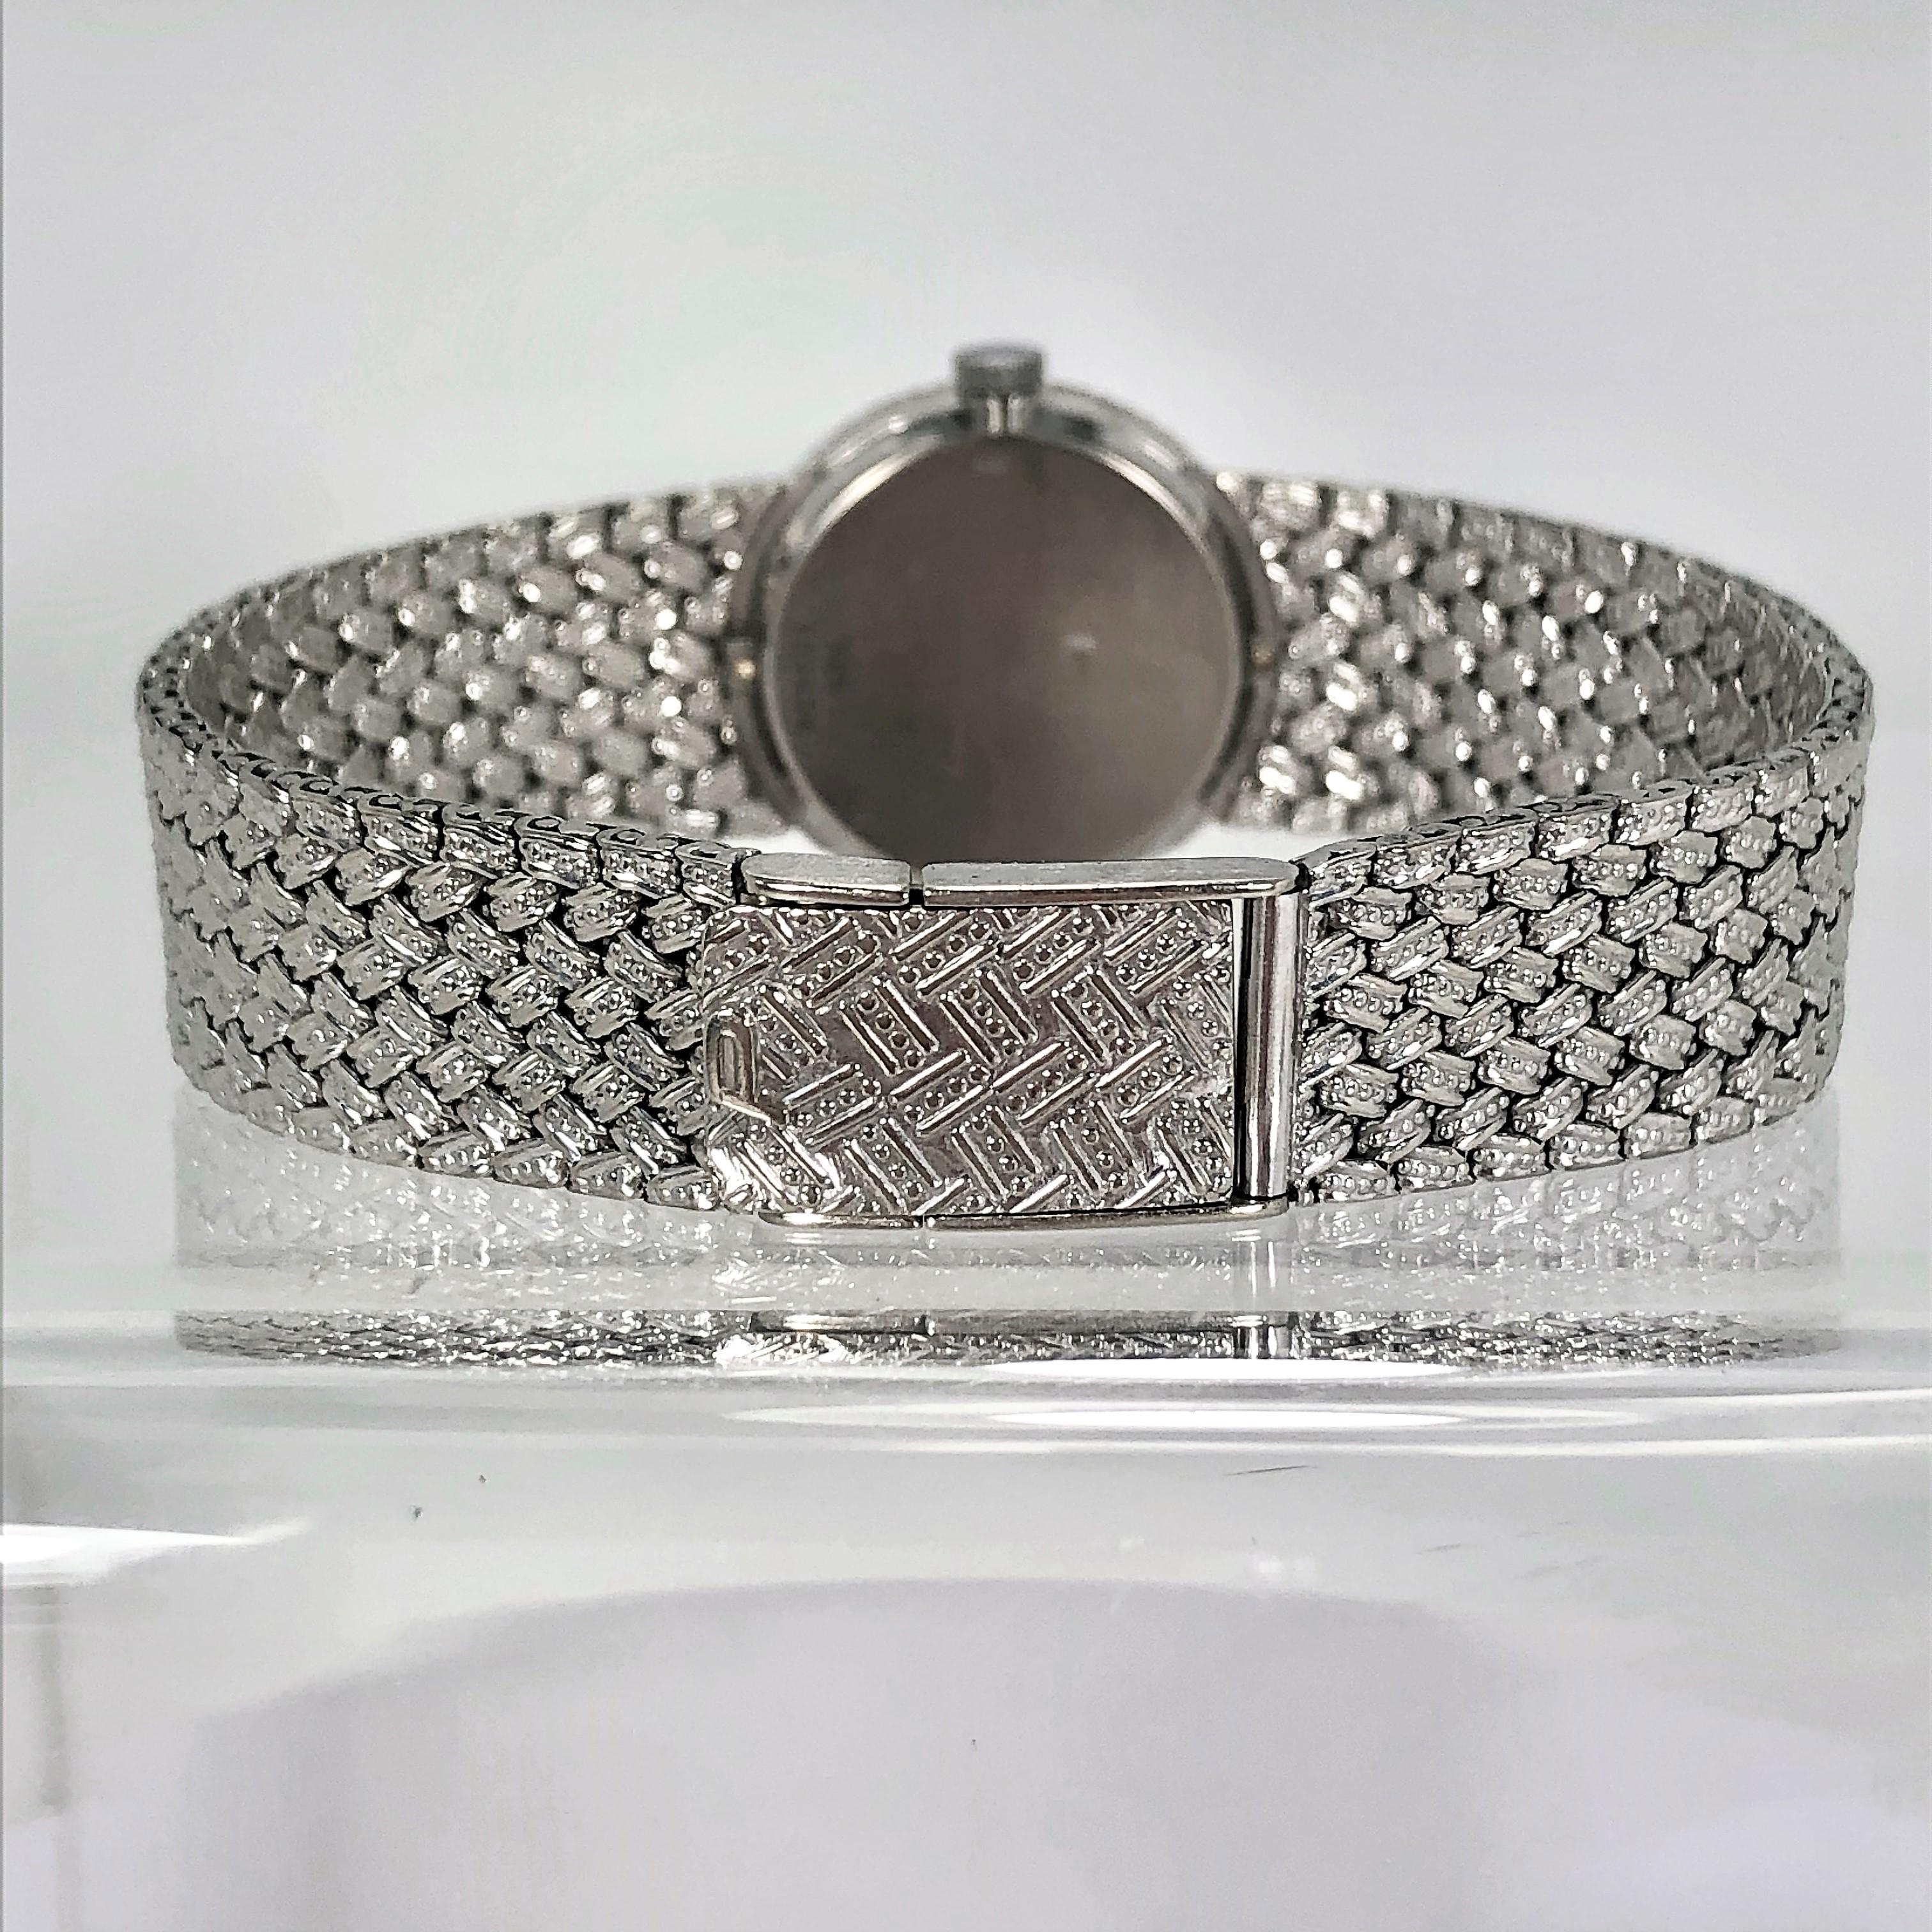 Women's Ladies Piaget Watch with Slate Grey Dial, Diamond Bezel and Unique Braided Band